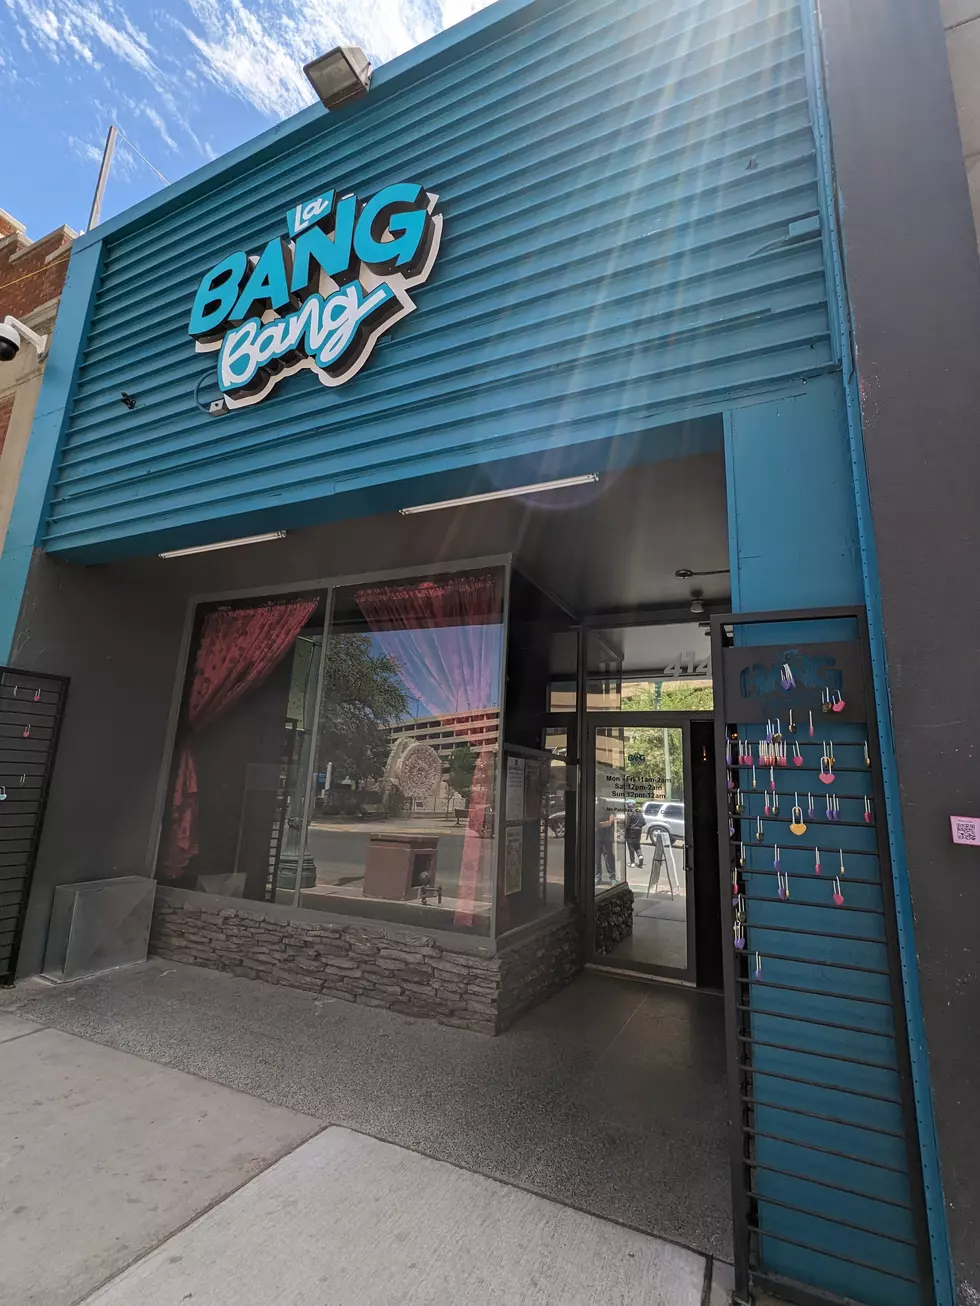 La Bang Bang: A Fresh Face With Exciting Flavors In Downtown El Paso